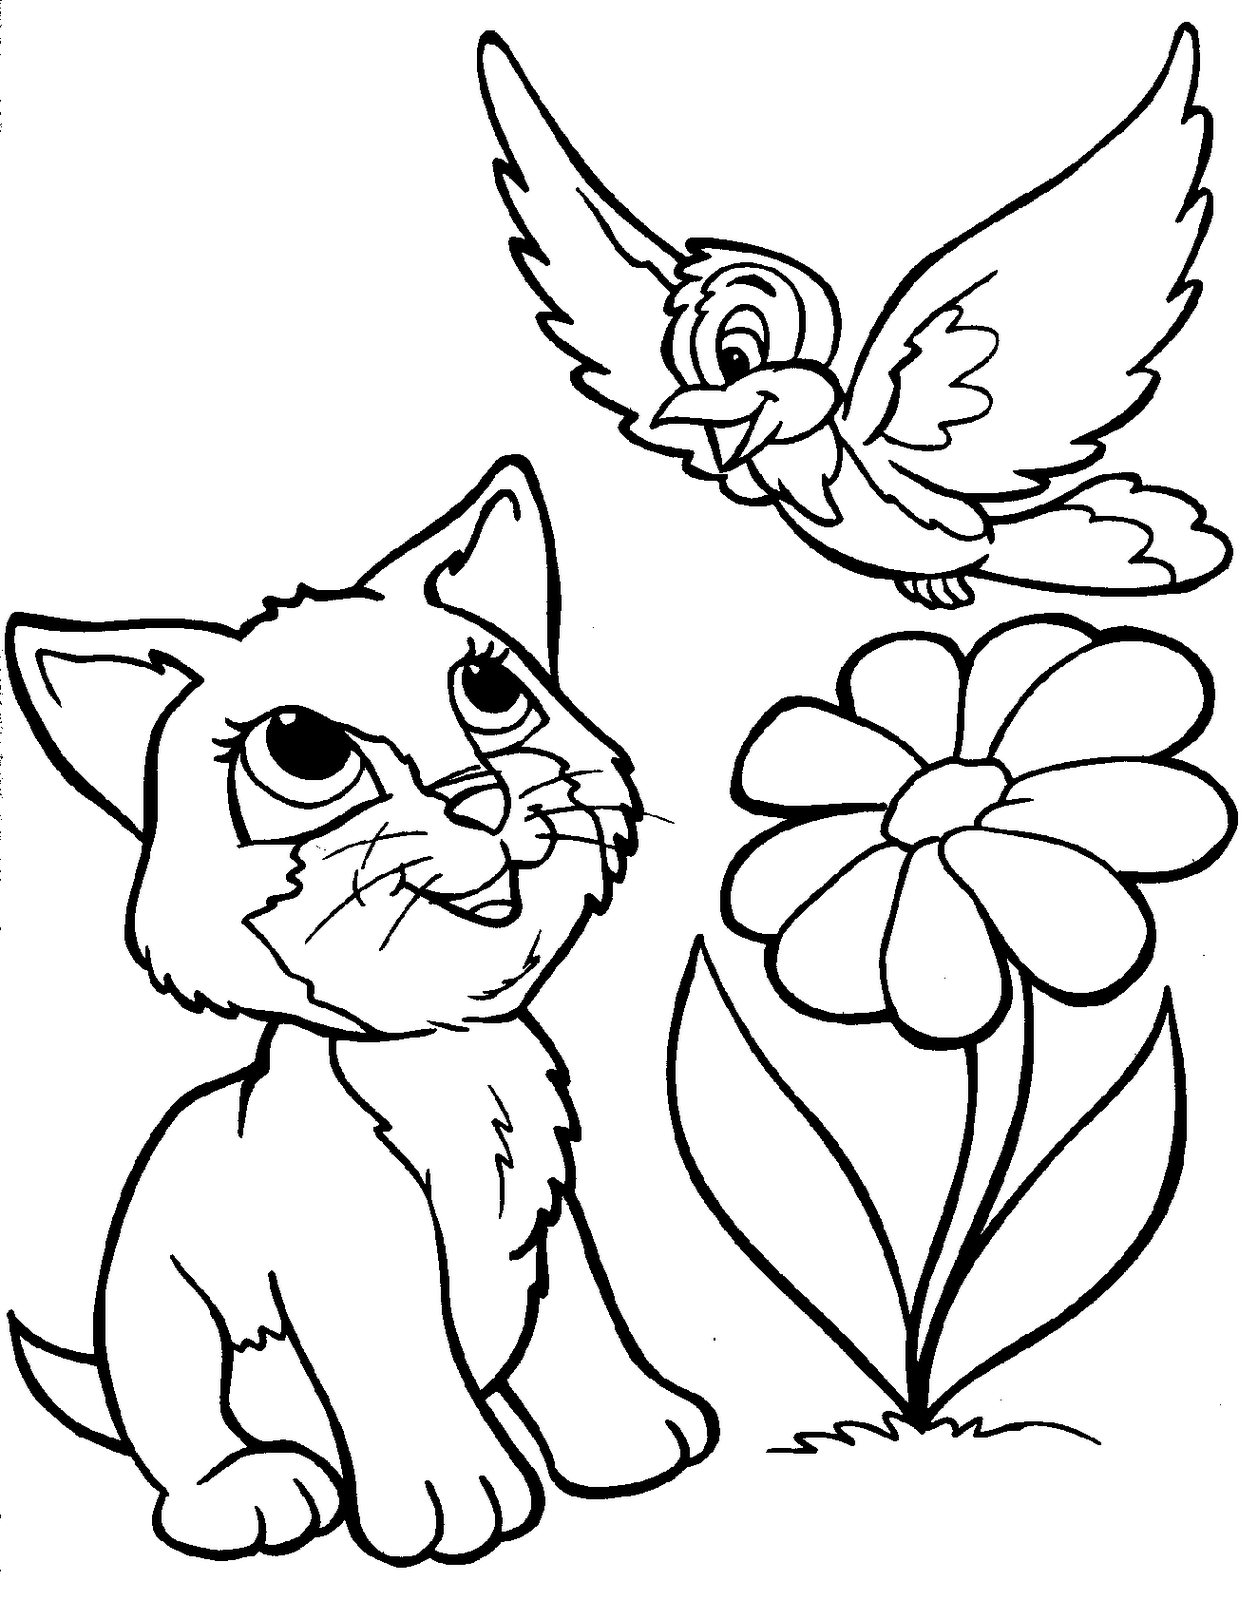 cute baby animal coloring pictures animals coloring pages getcoloringpagescom pictures baby animal coloring cute 